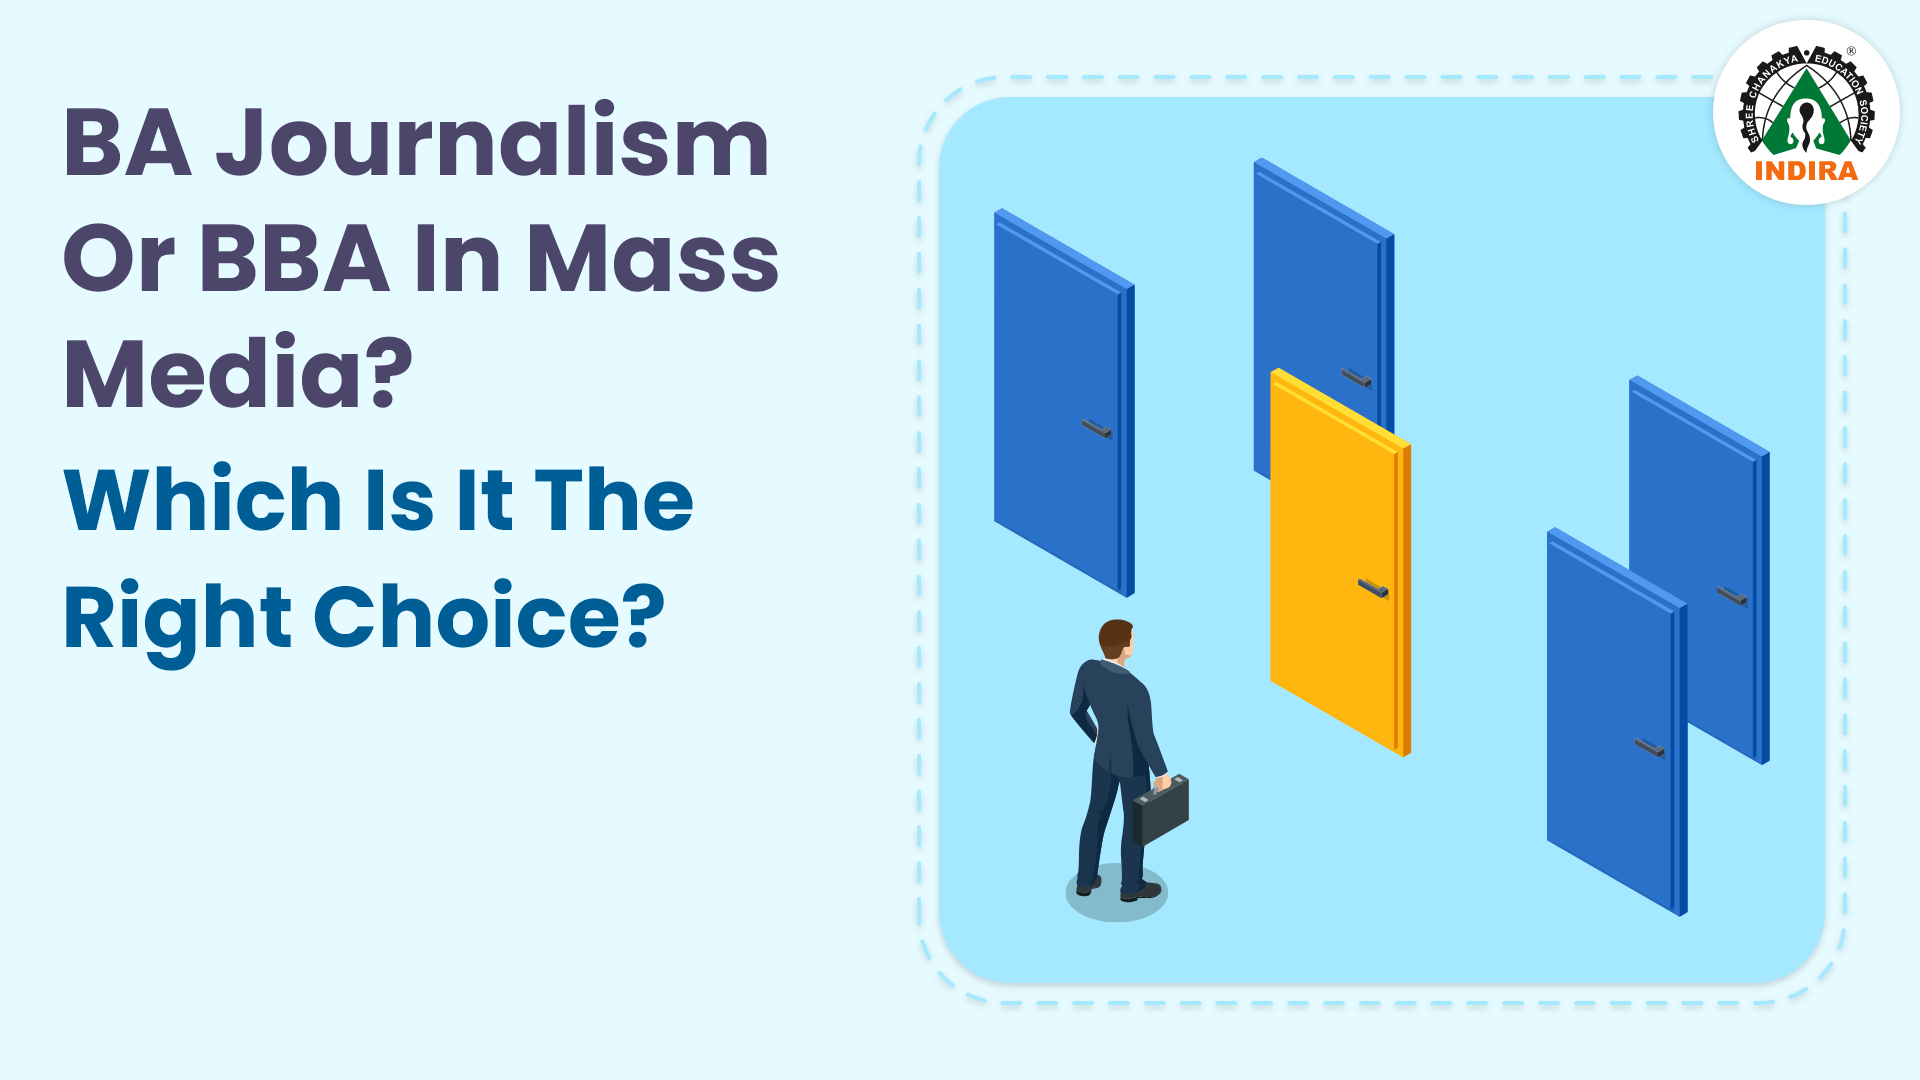 BA Journalism Or BBA in Mass Media? Which Is It The Right Choice?